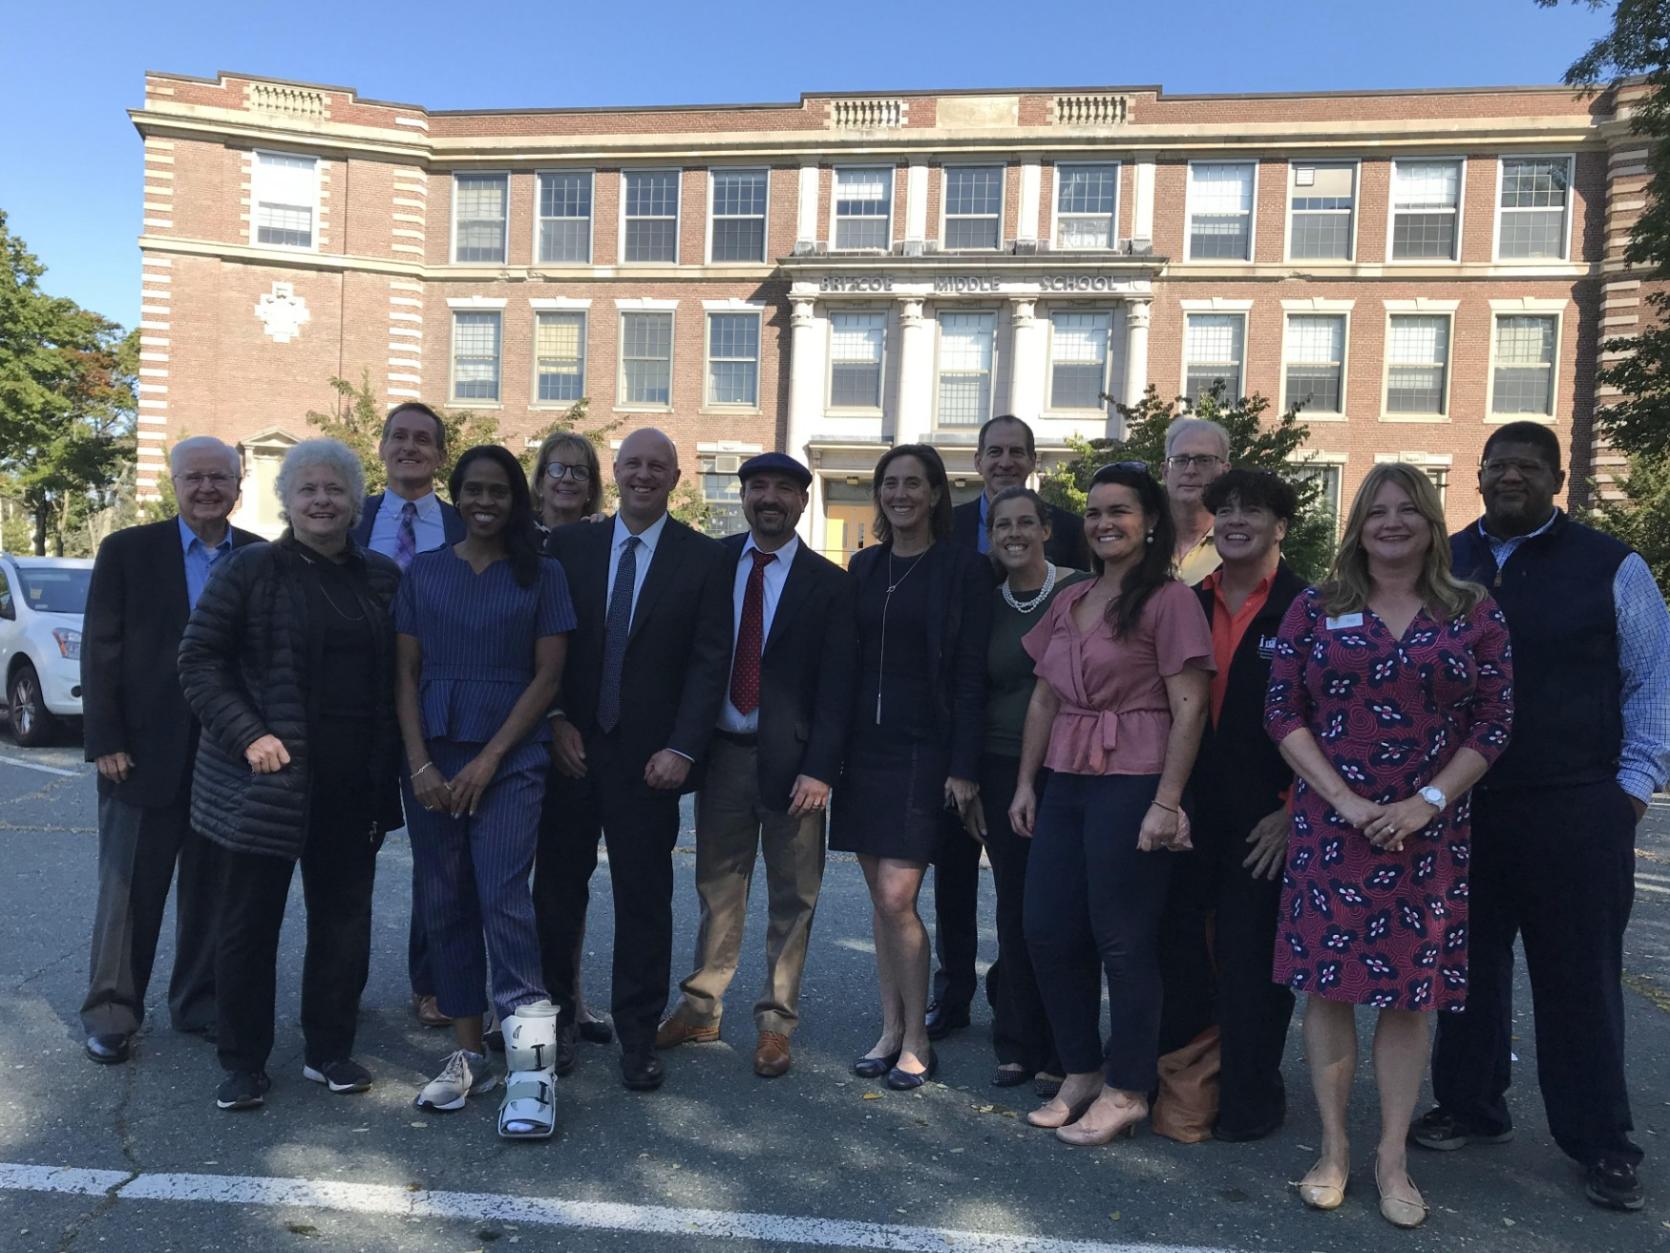 Secretary Kennealy and Undersecretary Maddox with local officials, developers, housing advocates, and others at the Briscoe School in Beverly.